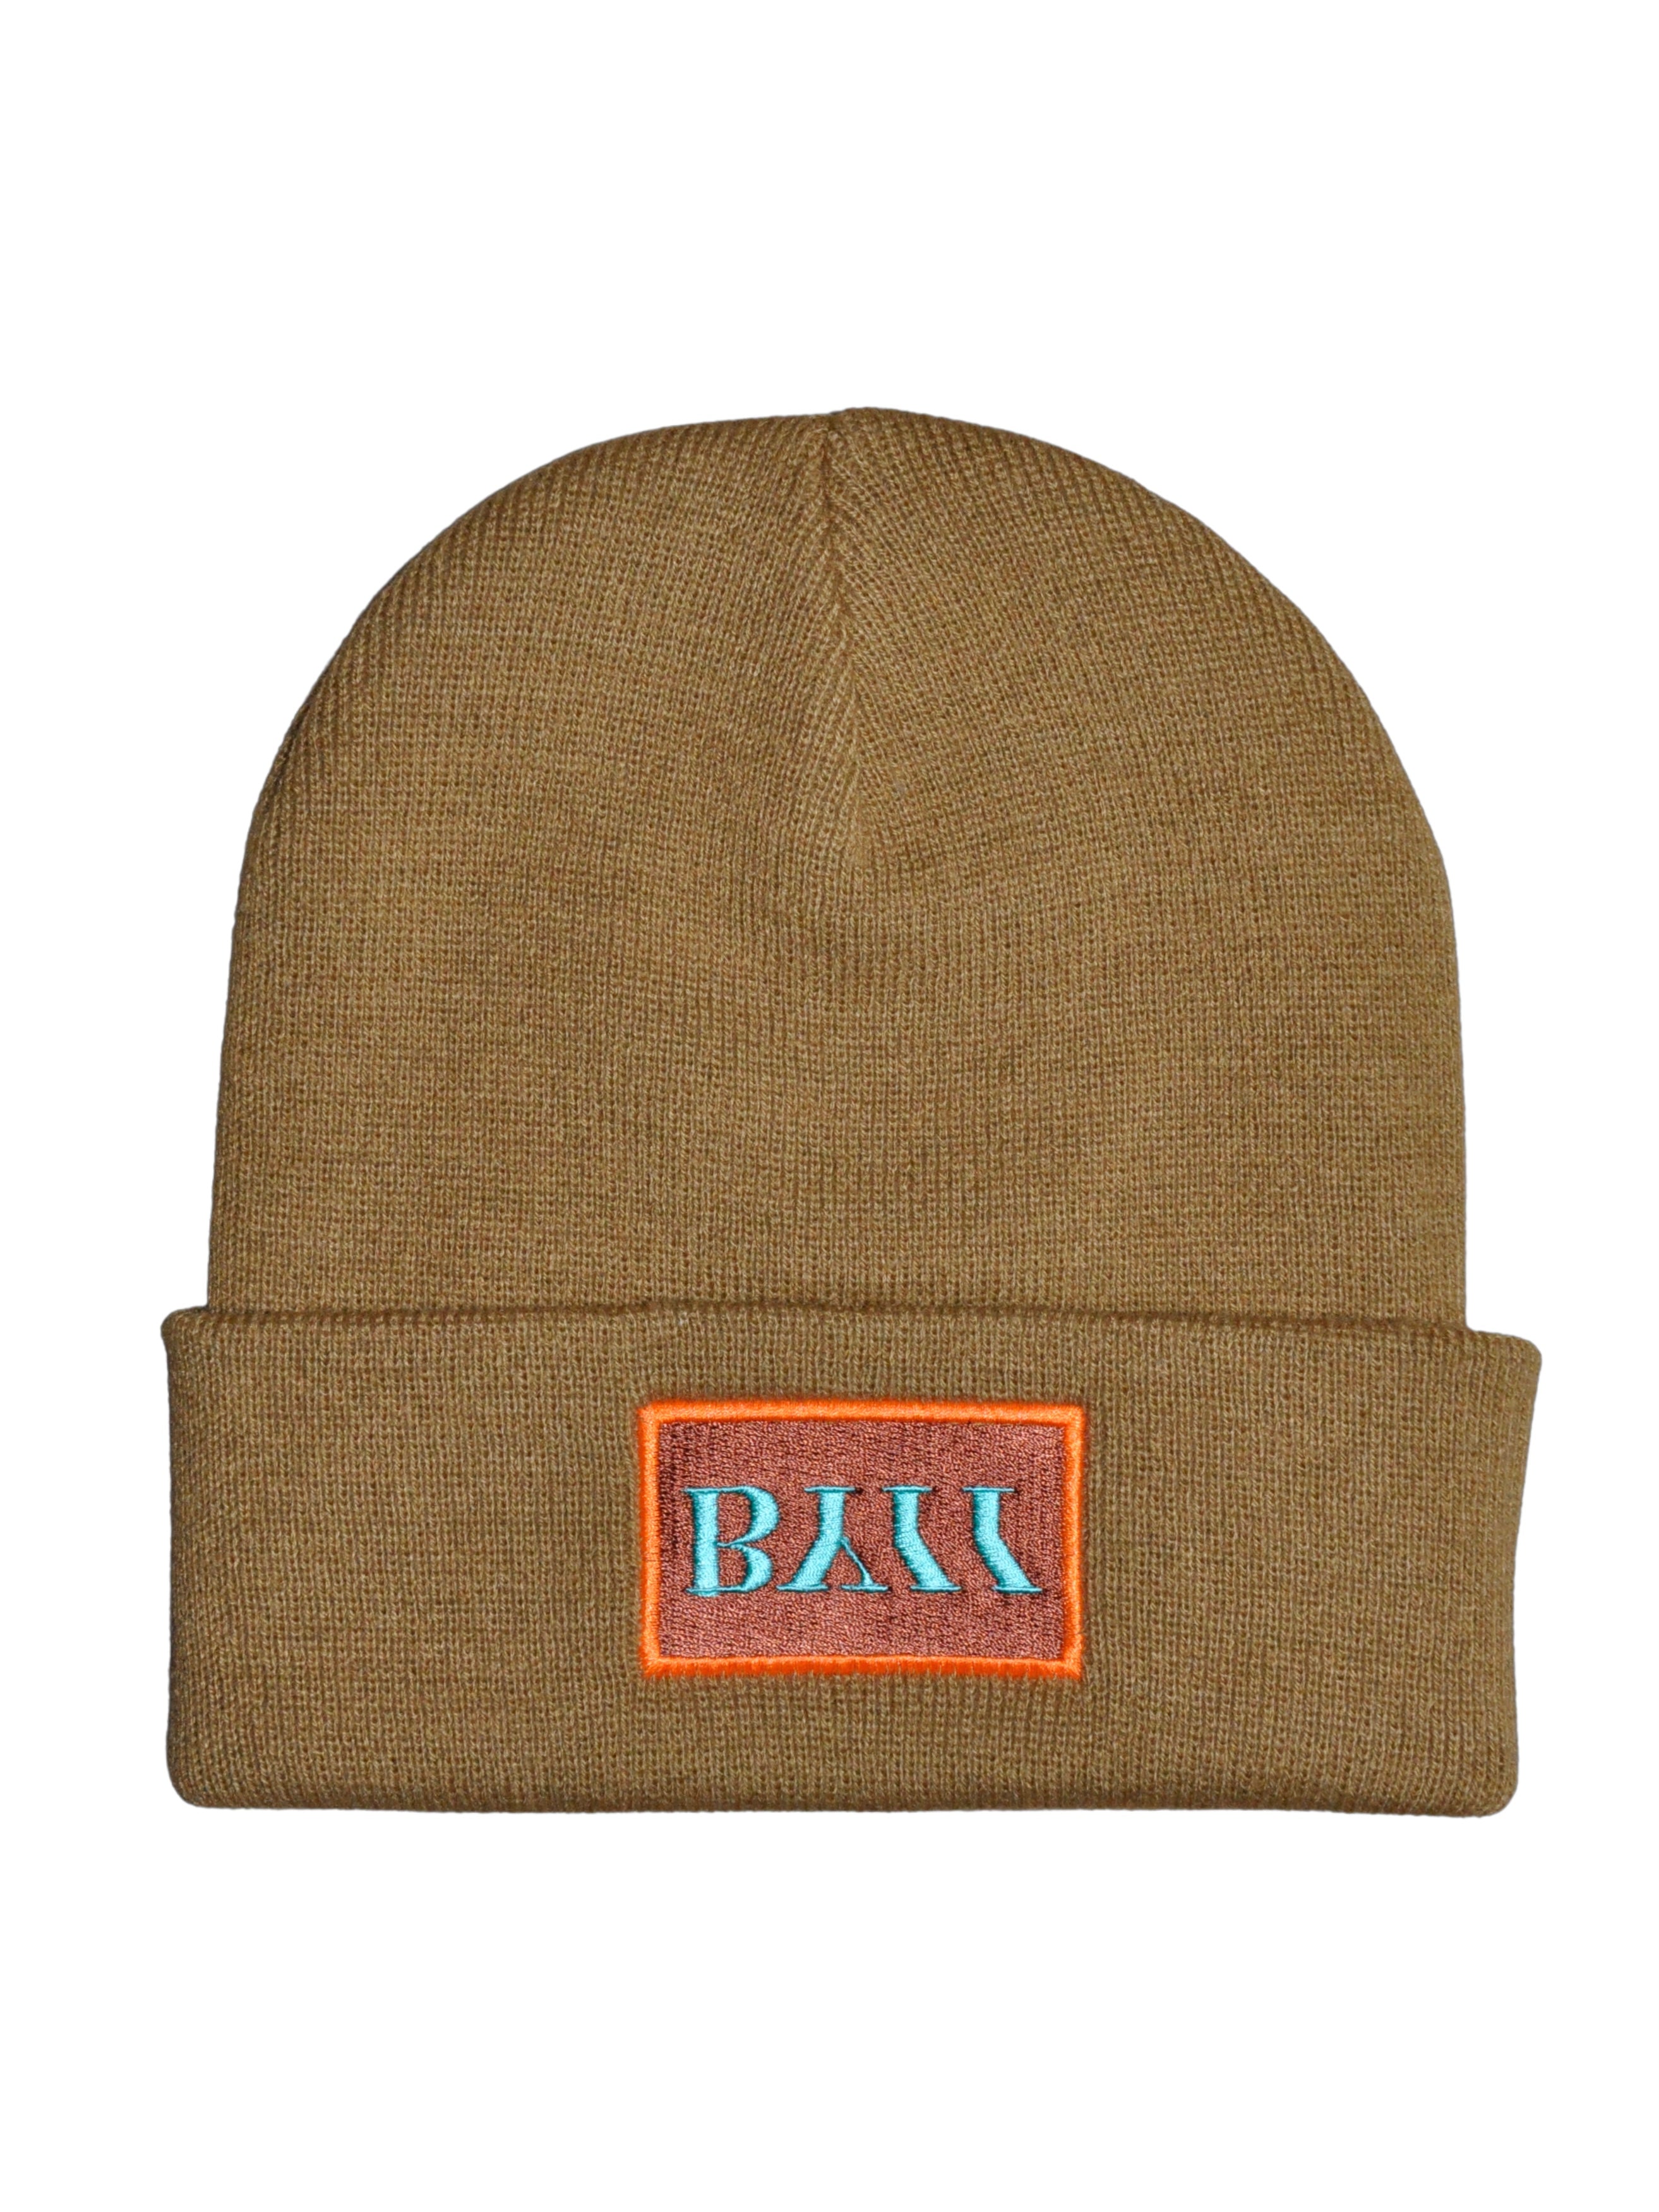 BY11 Embroidered Logo Beanie - Caramel/Mint/Tangerine